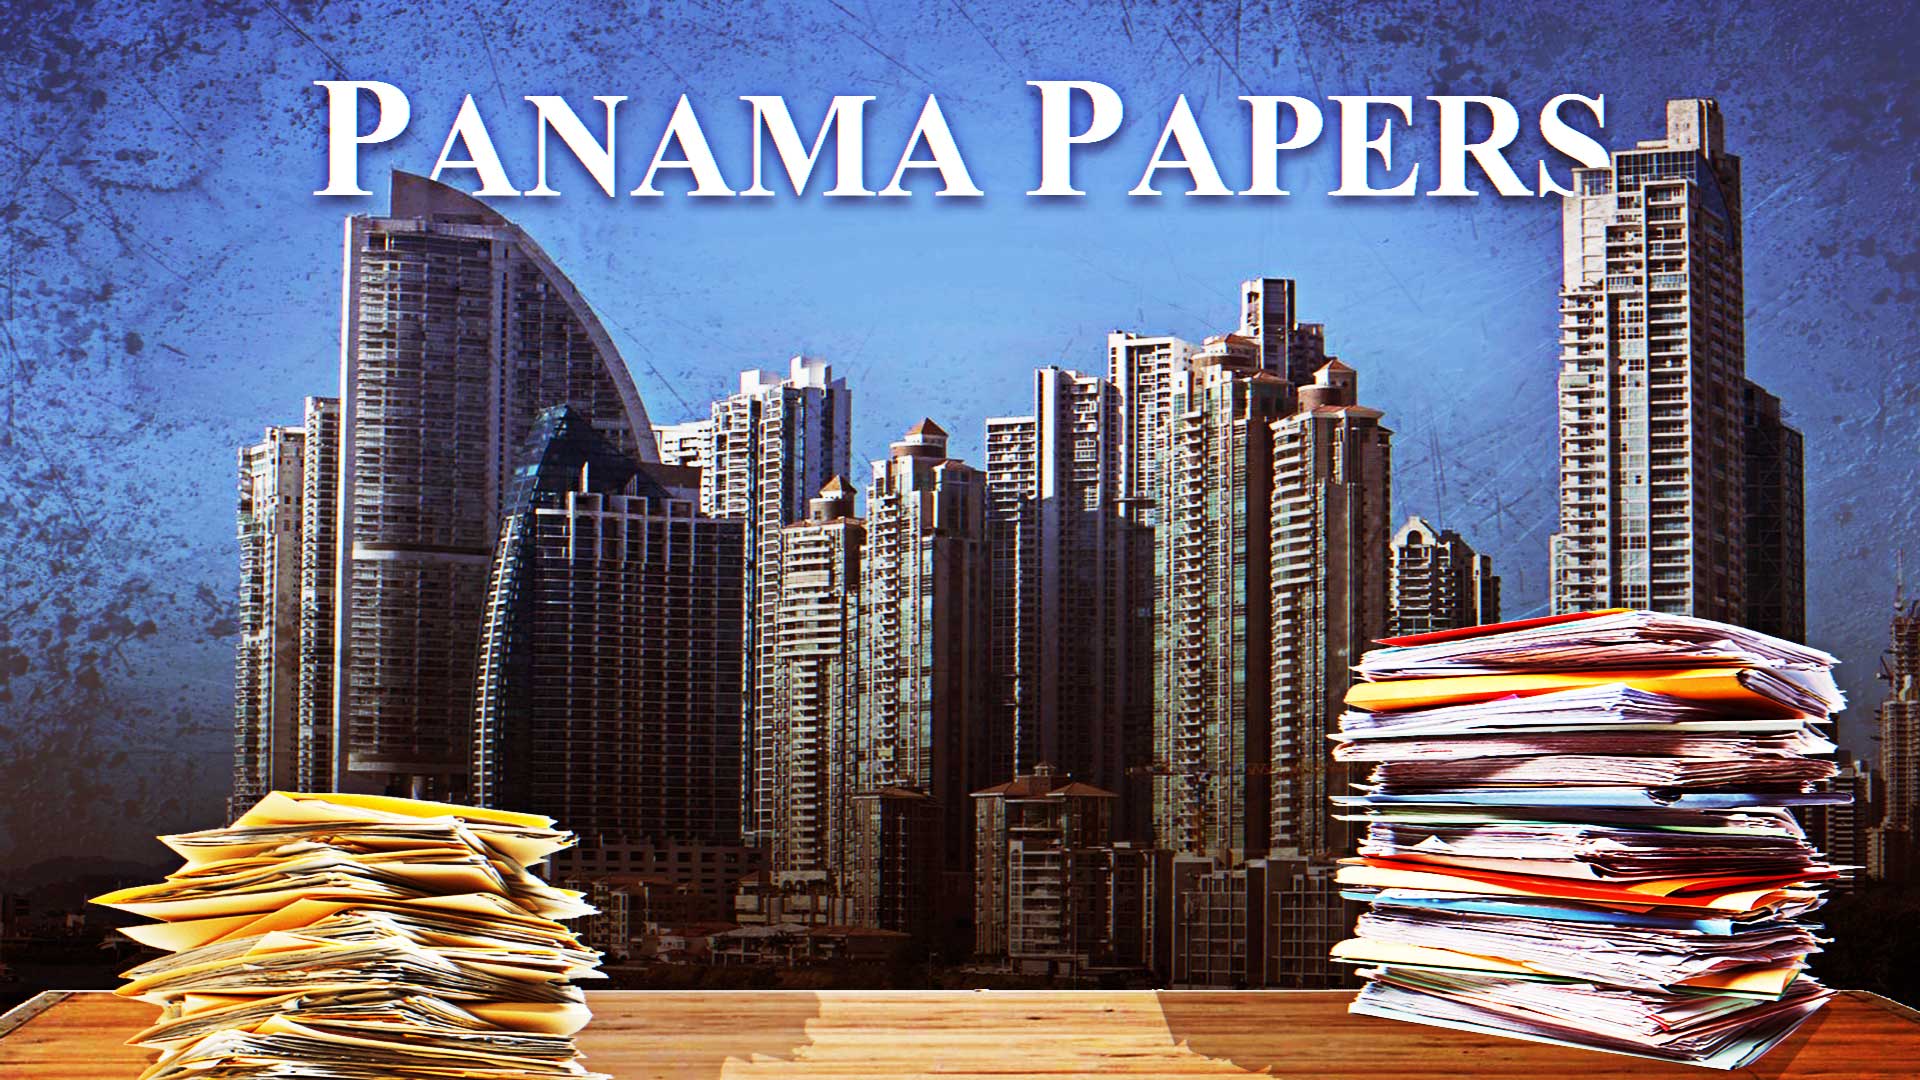 panama papers sursa newsclick.in